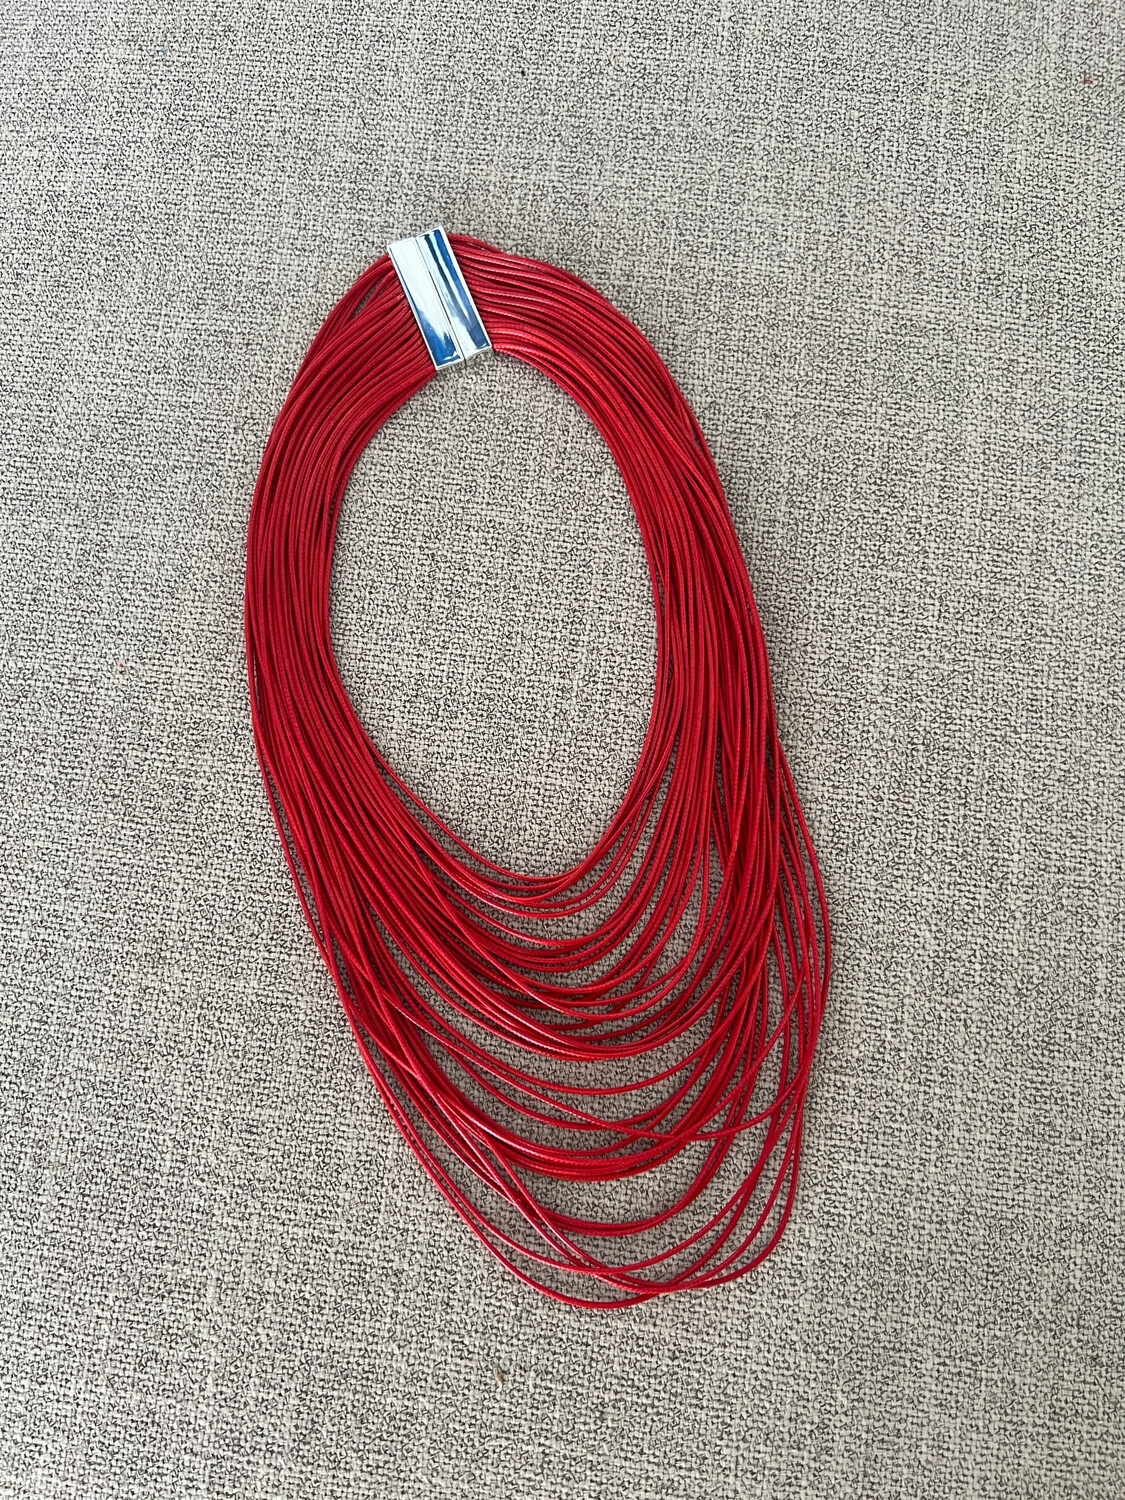 Red Strings Layers Necklace